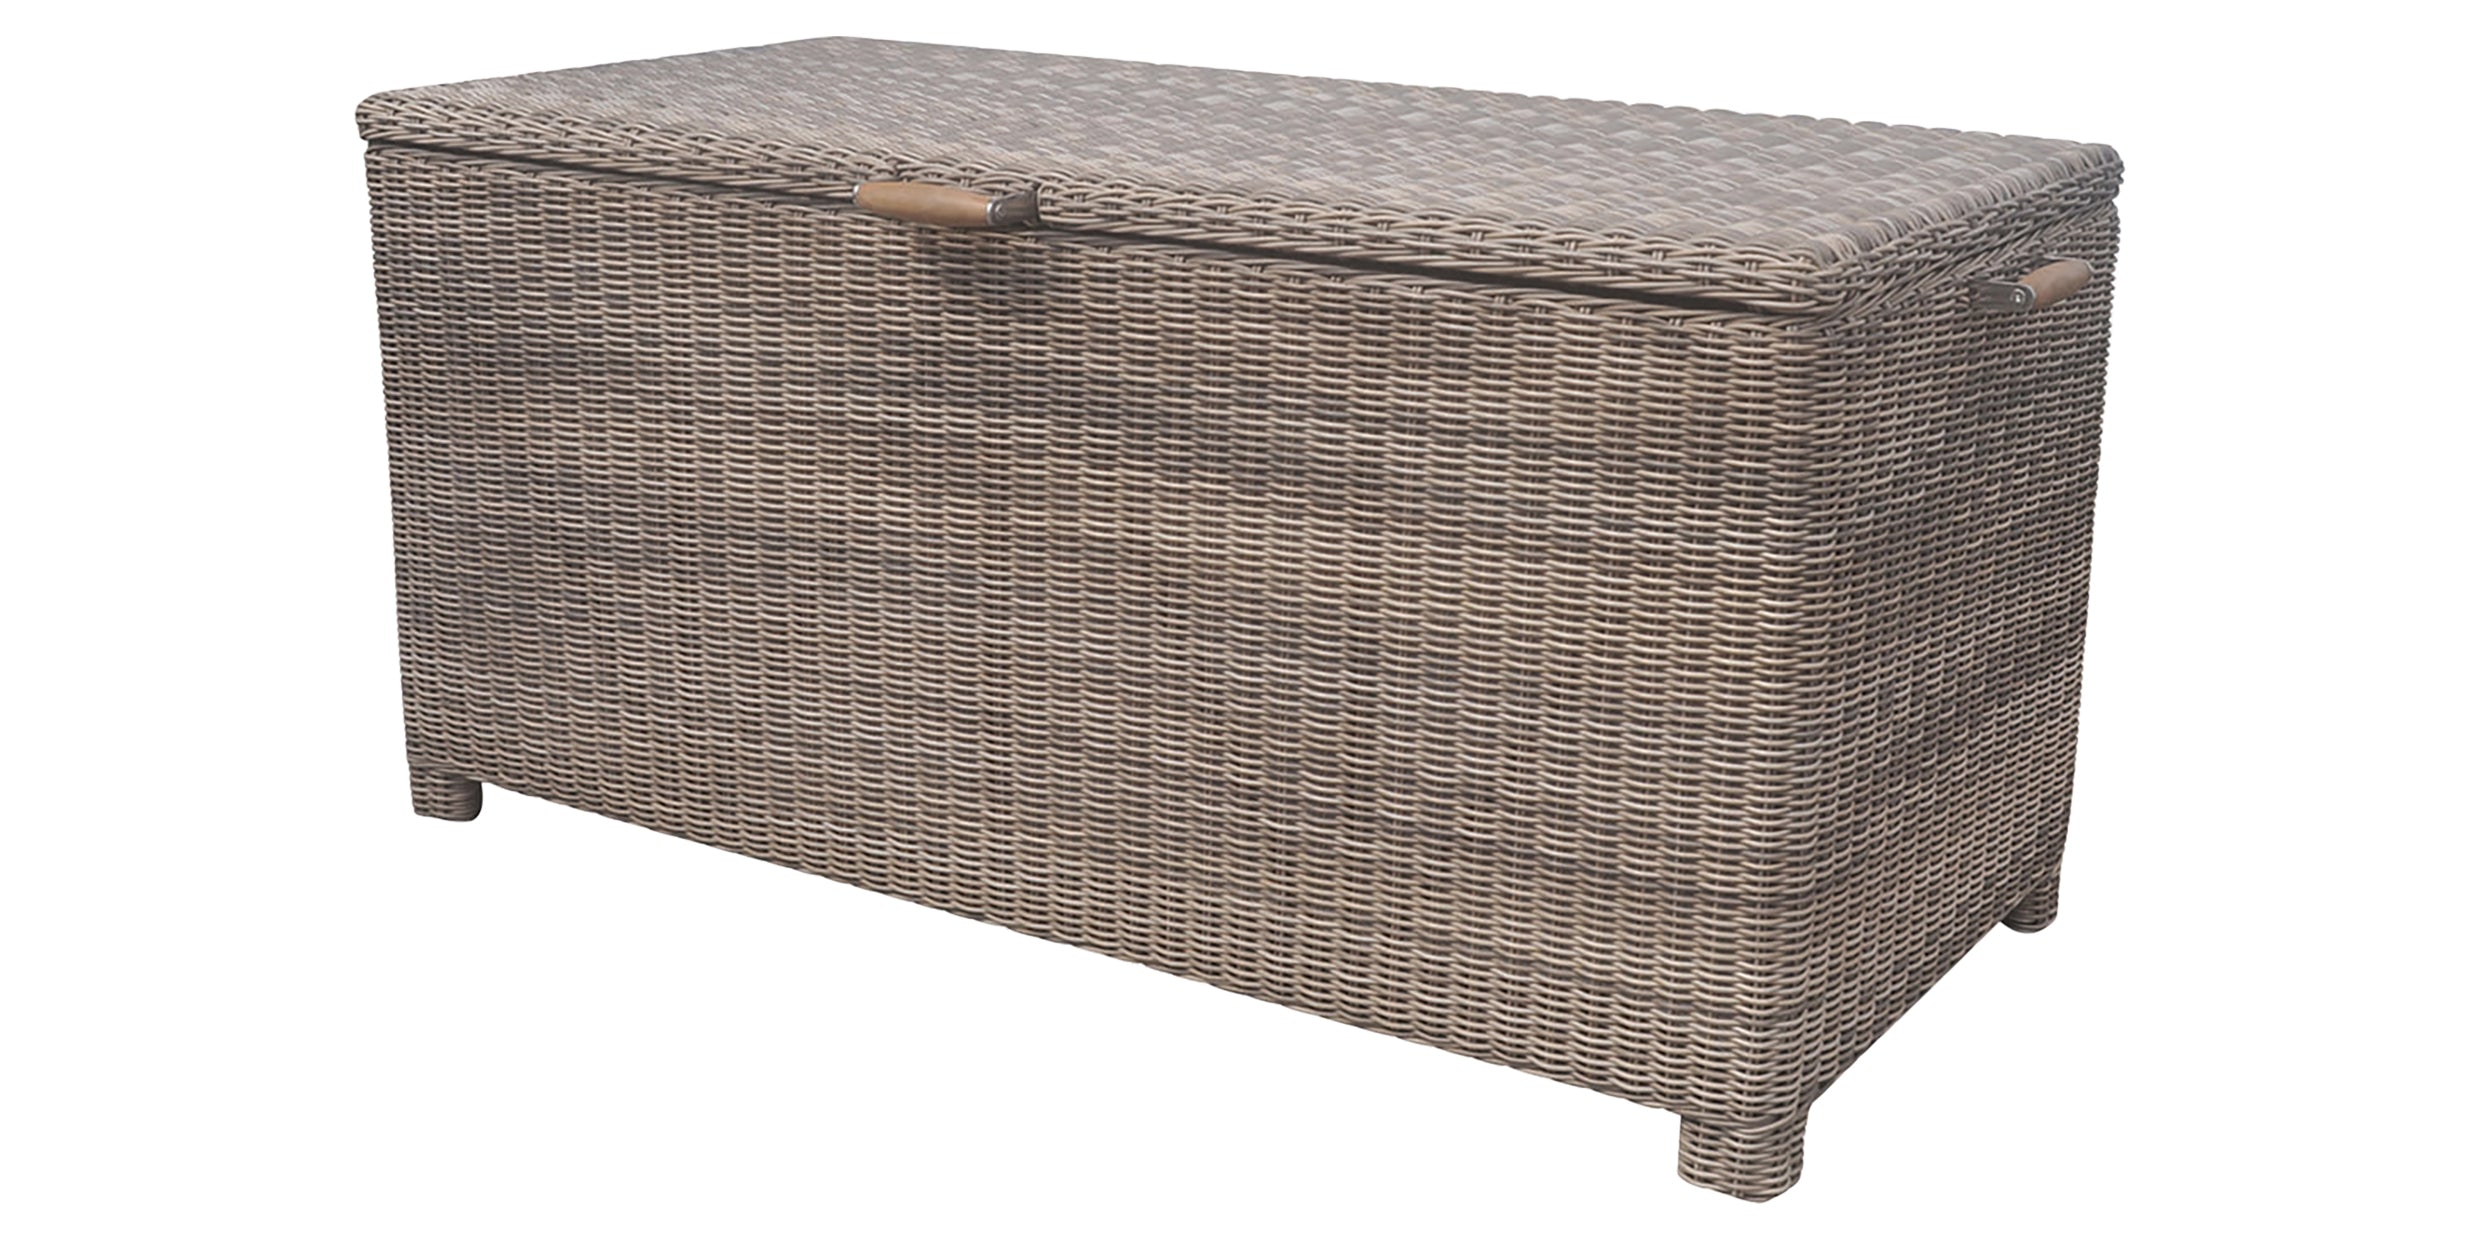 Cushion Box (67in x 32in) | Kingsley Bate Sag Harbor Collection | Valley Ridge Furniture